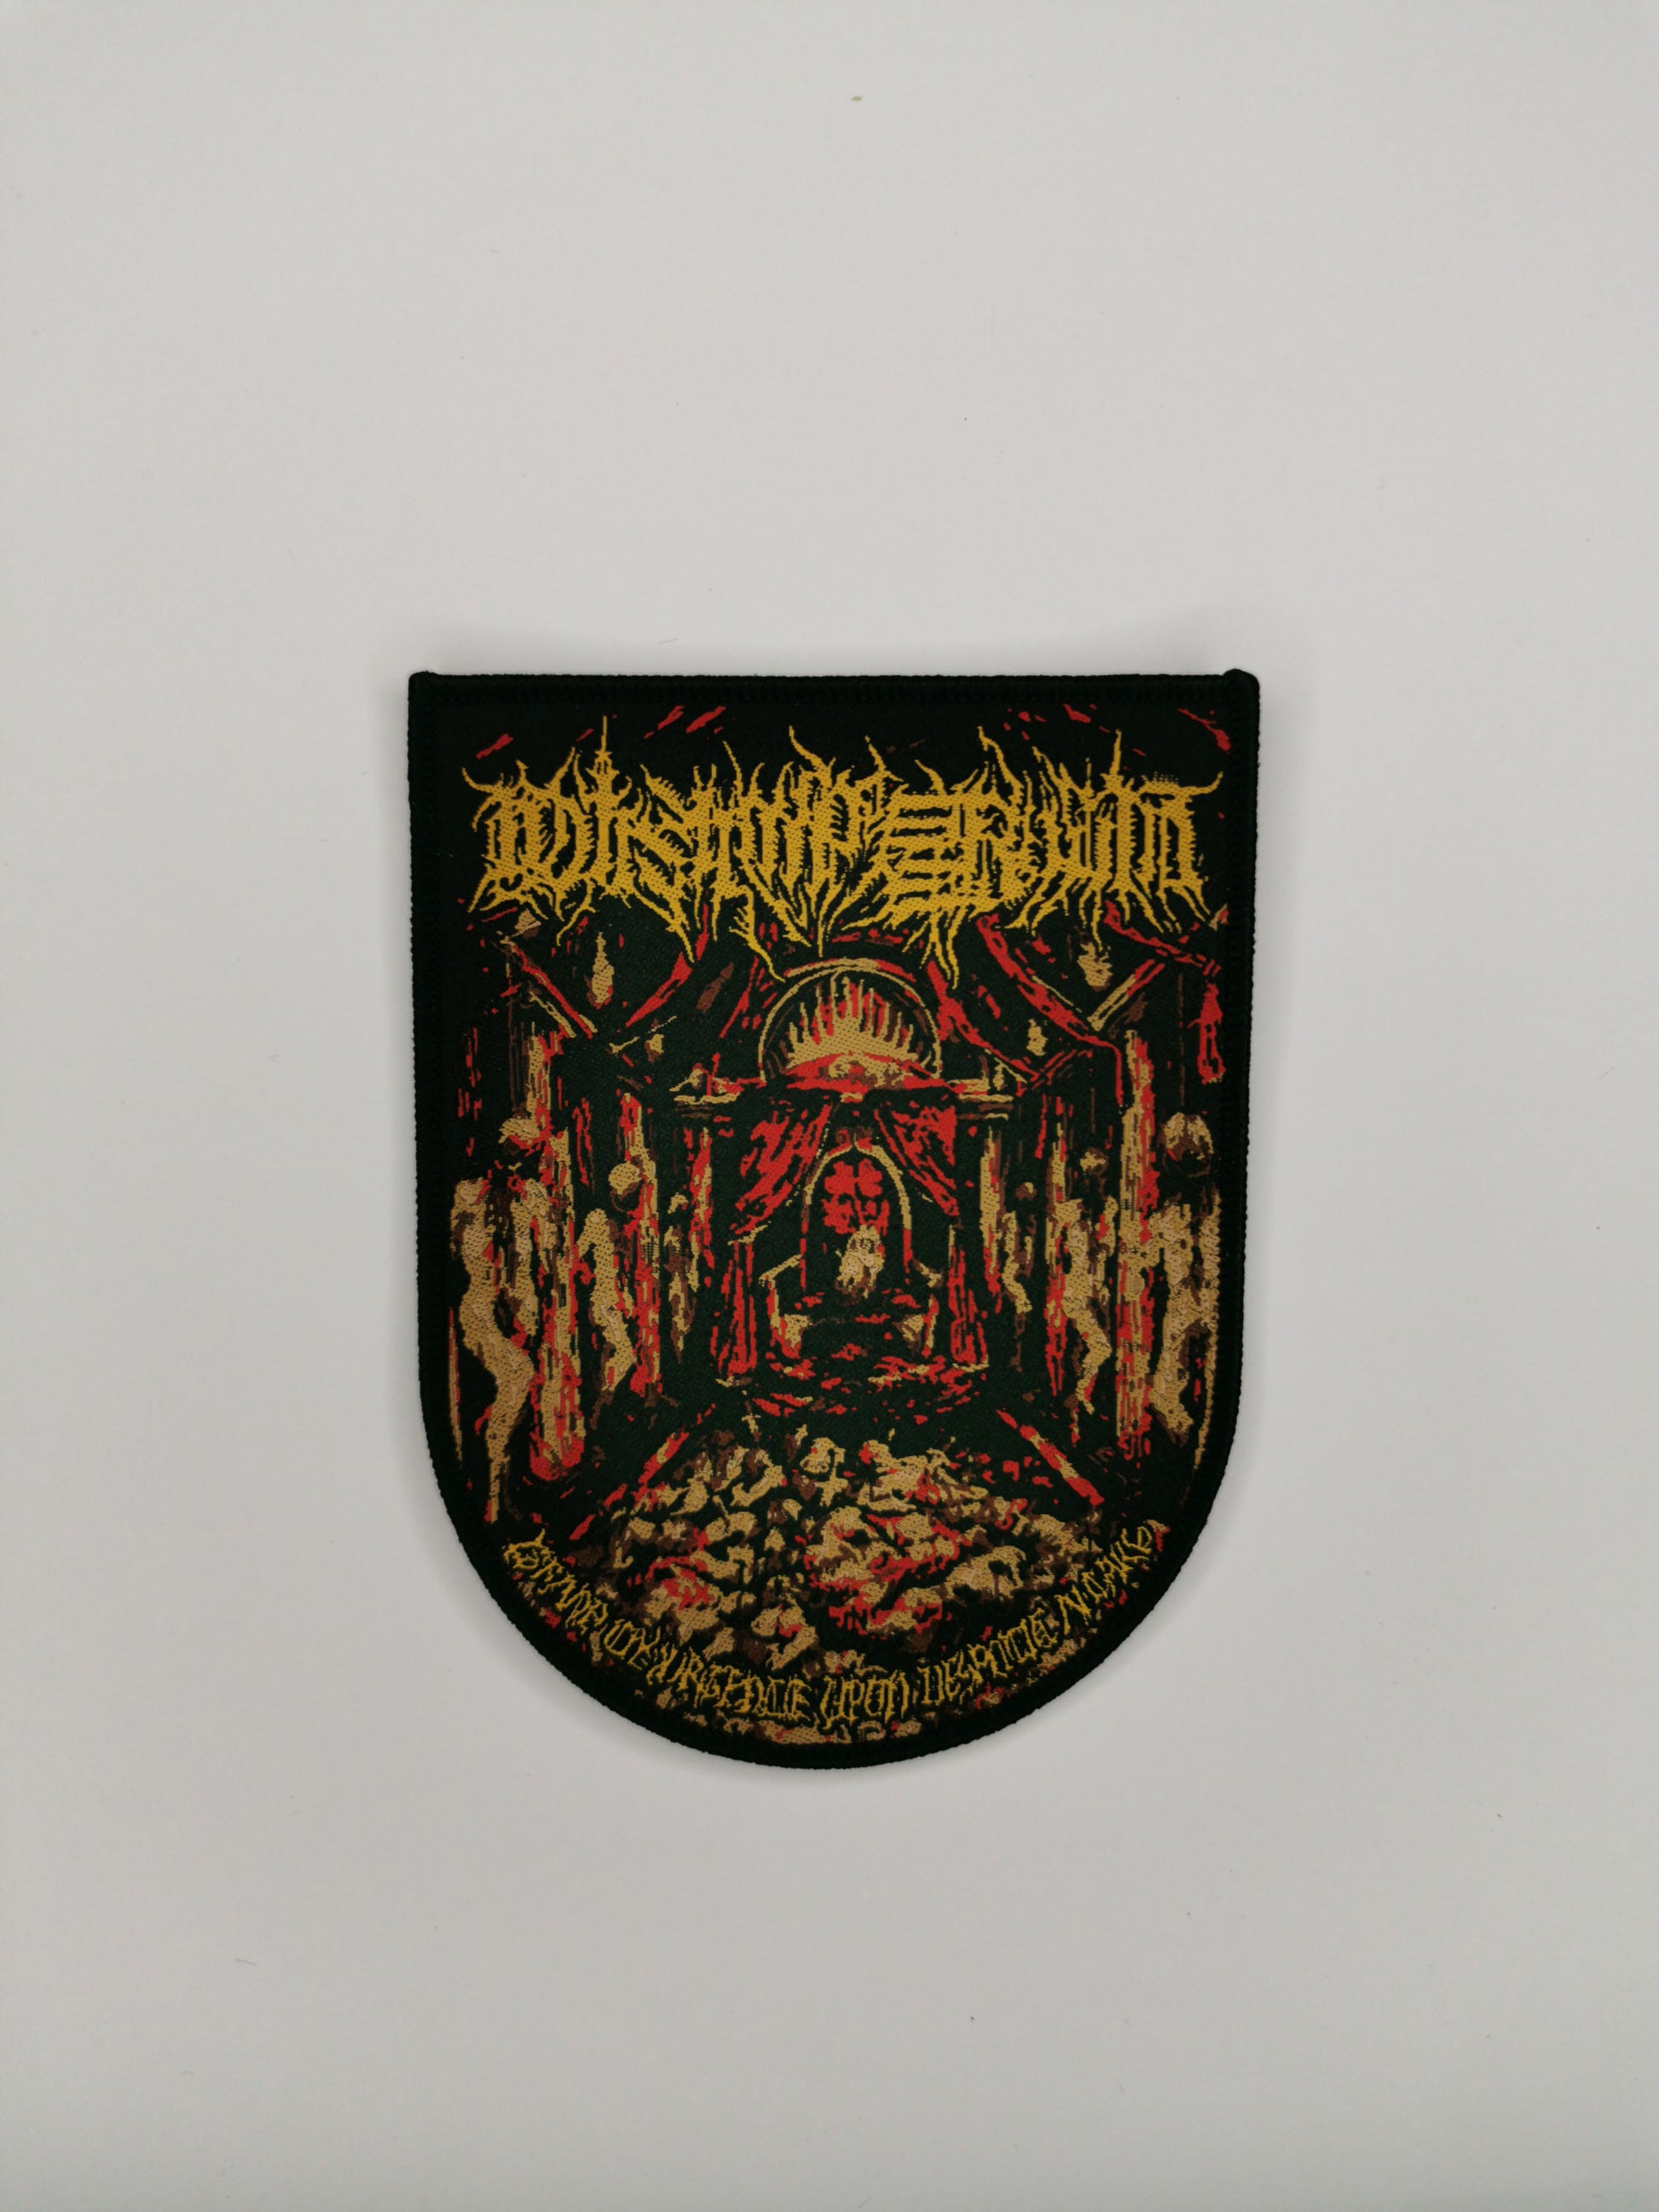 Temporal Dimensions Patches Disimperium Grand Insurgence upon Despotic Altars Black Border Woven Patch